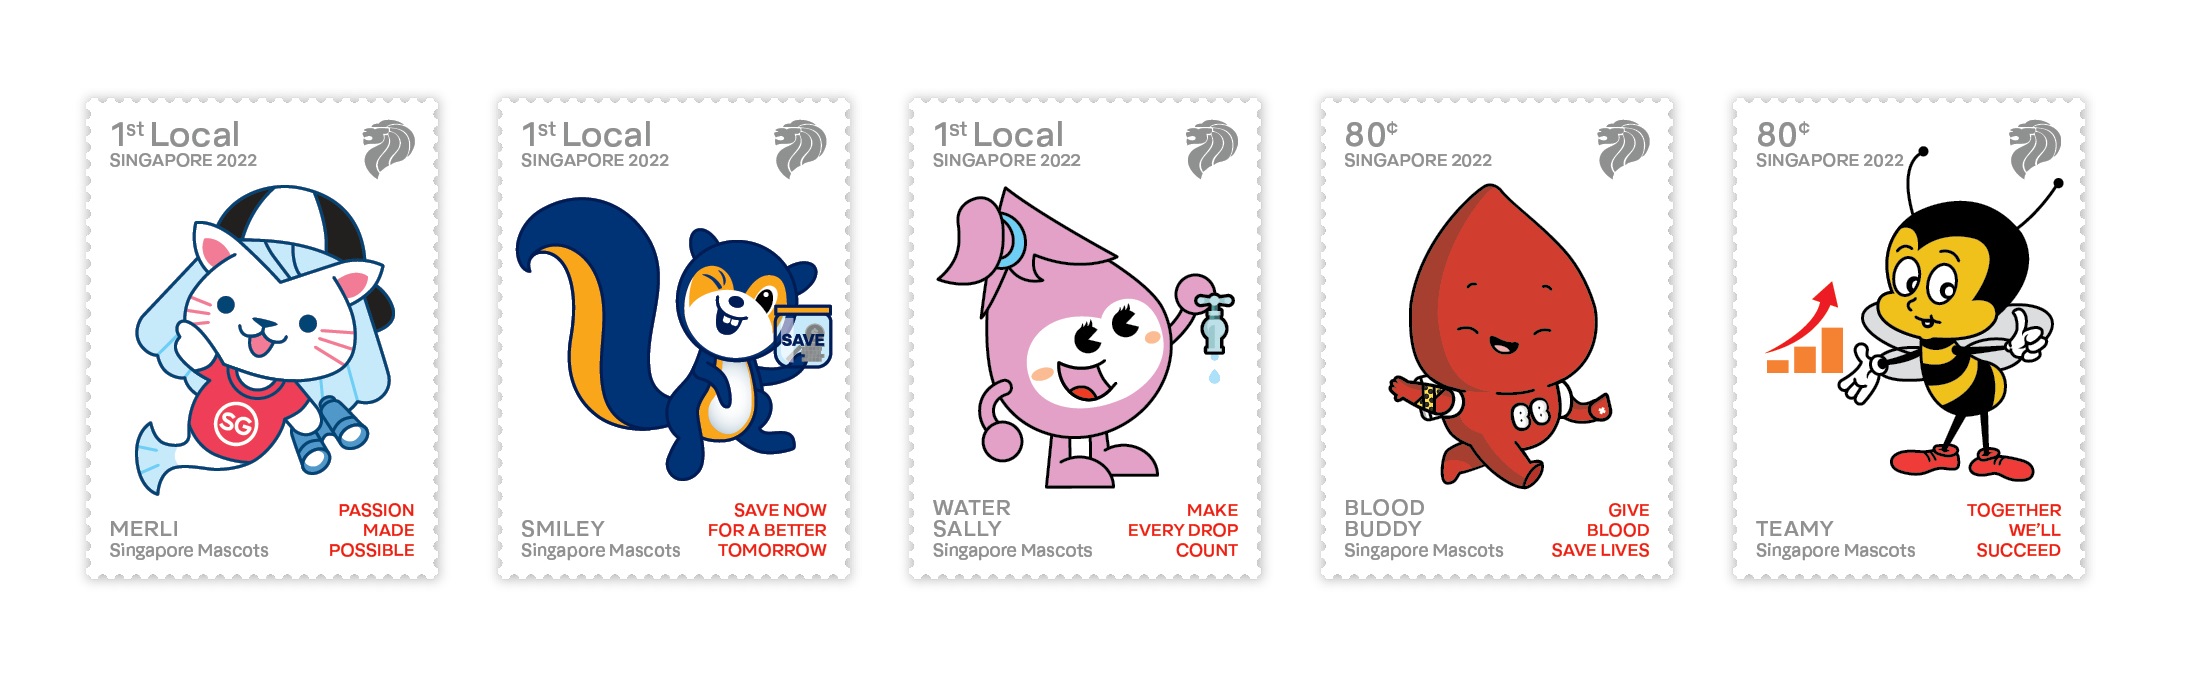 SingPost issues second set of Singapore Mascot stamps featuring more of Singapore’s favourite icons